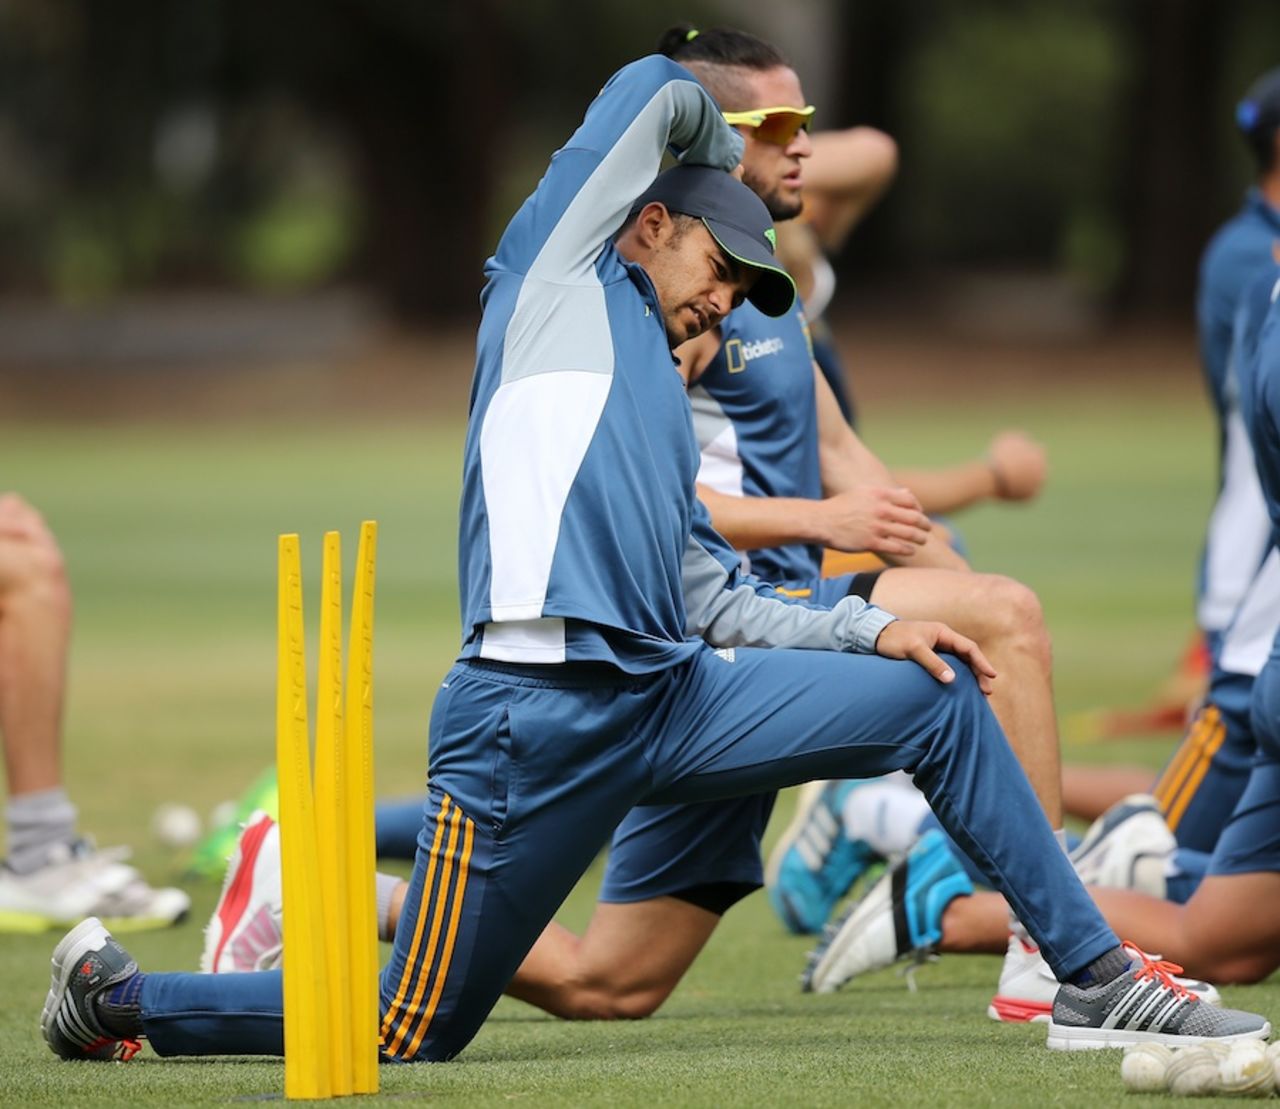 JP Duminy stretches before a training session, Adelaide, November 4, 2014